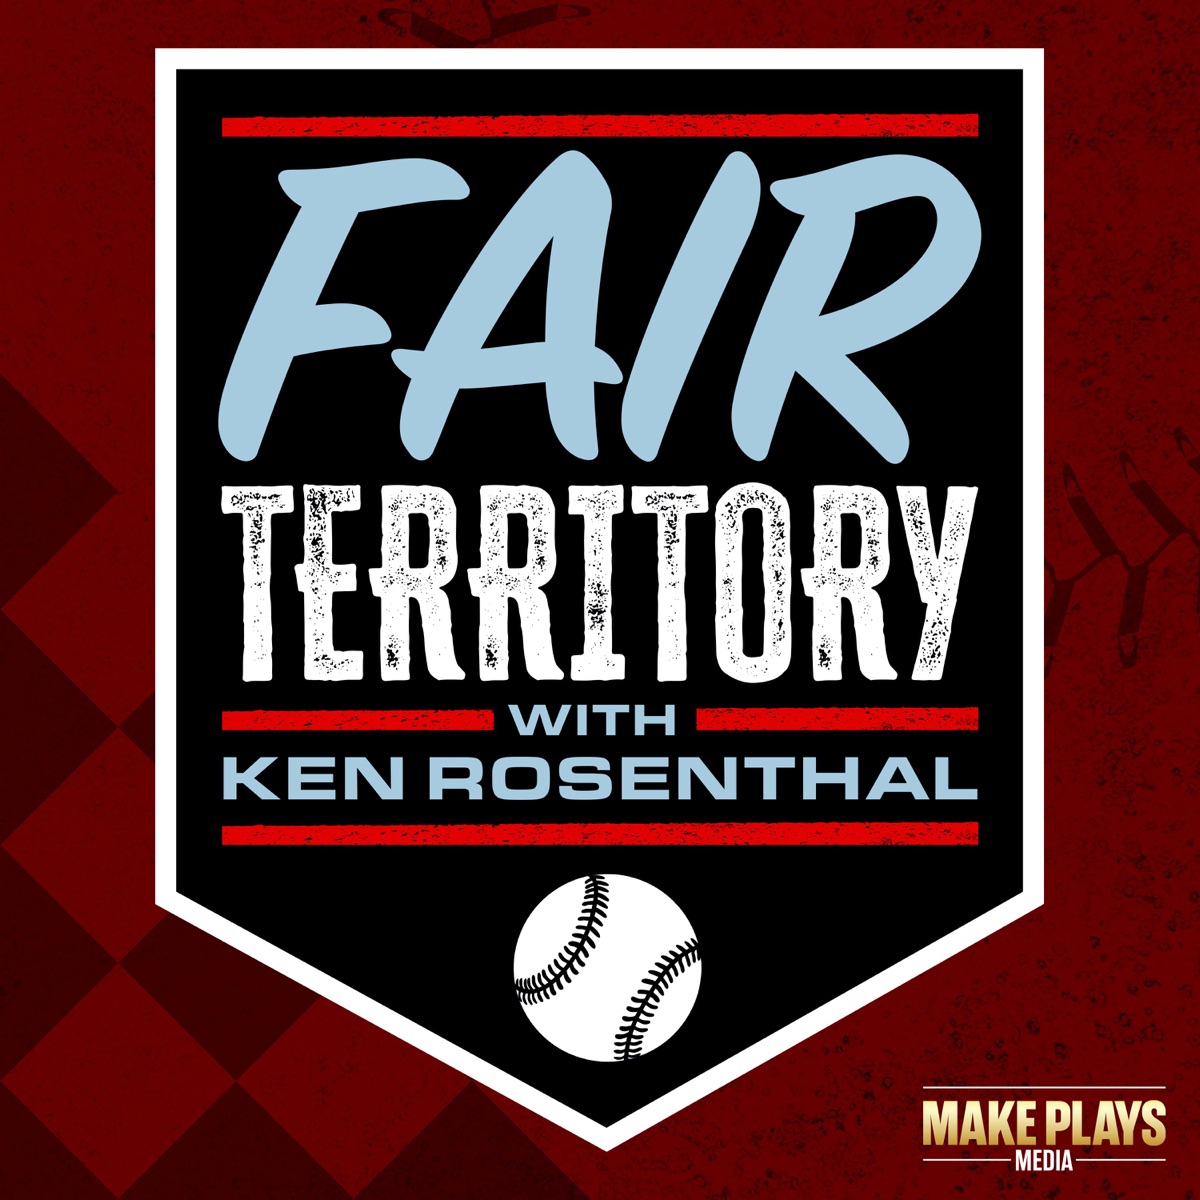 MLB umpire shares his opinion of new rules: Ken Rosenthal's